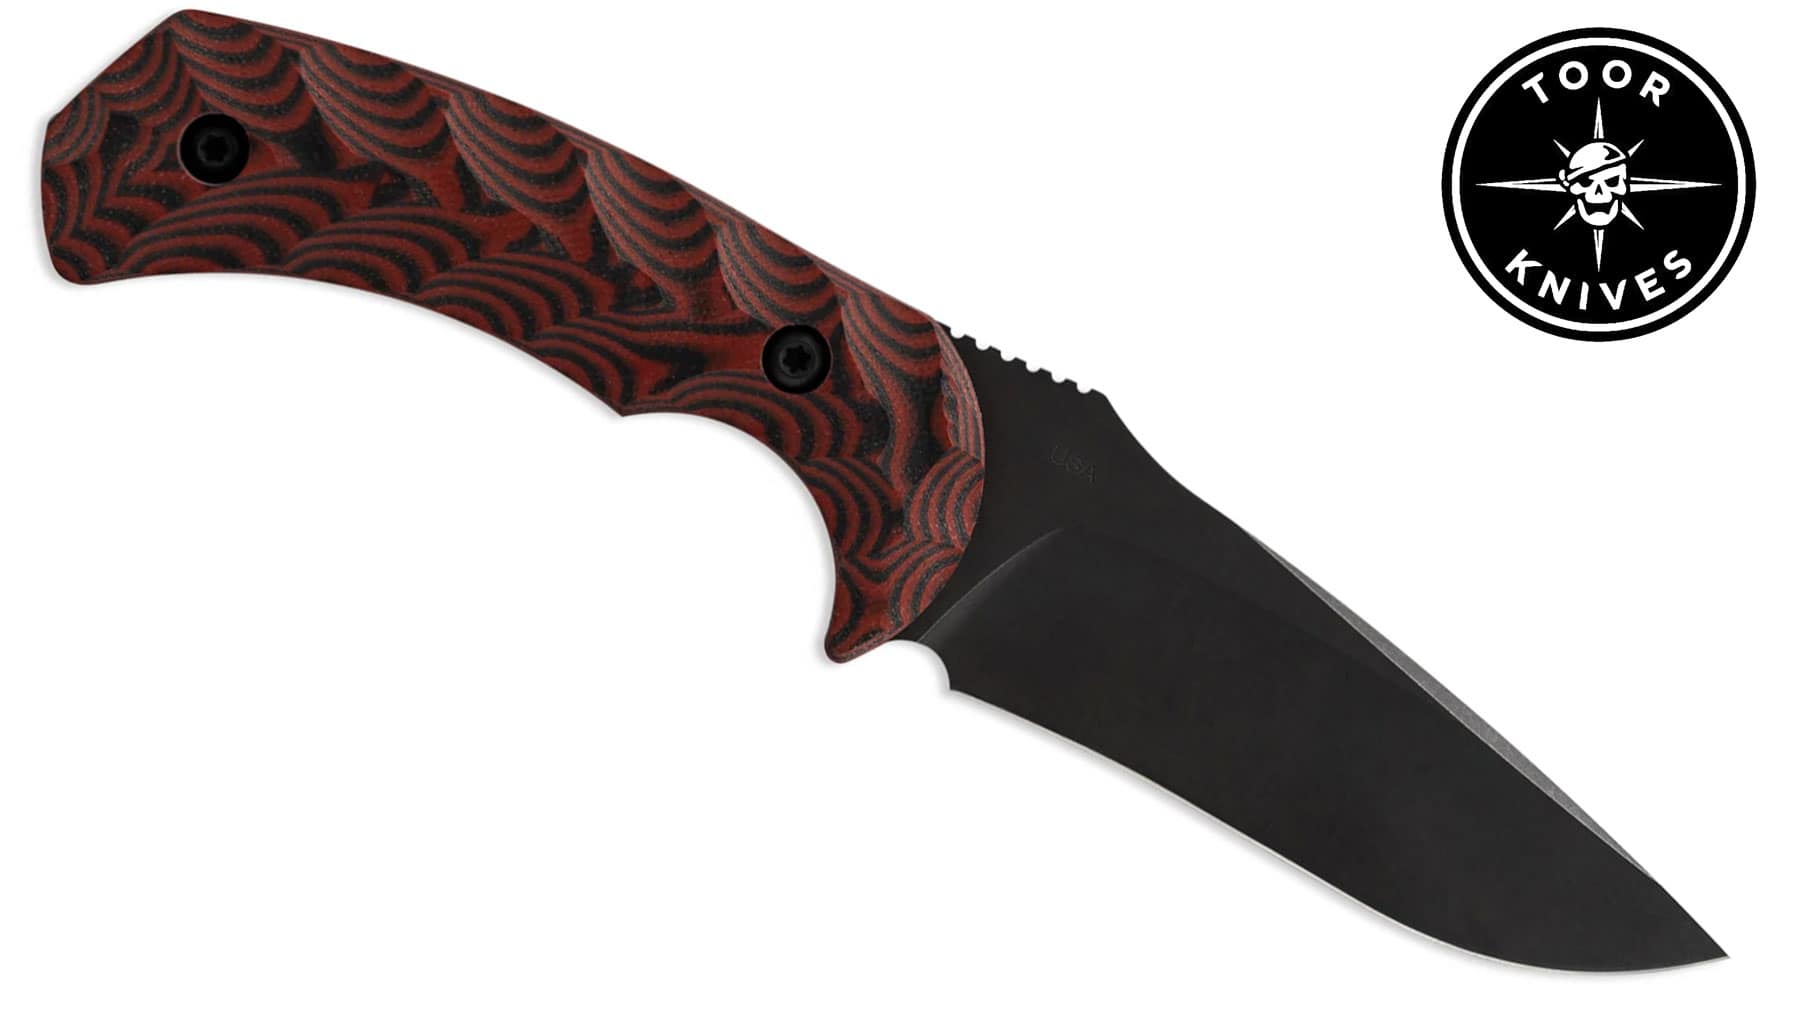 Steel Eagle 105C Knife - TOPS Knives - High-Quality, Durable, American-Made  - TOPS Knives Tactical OPS USA